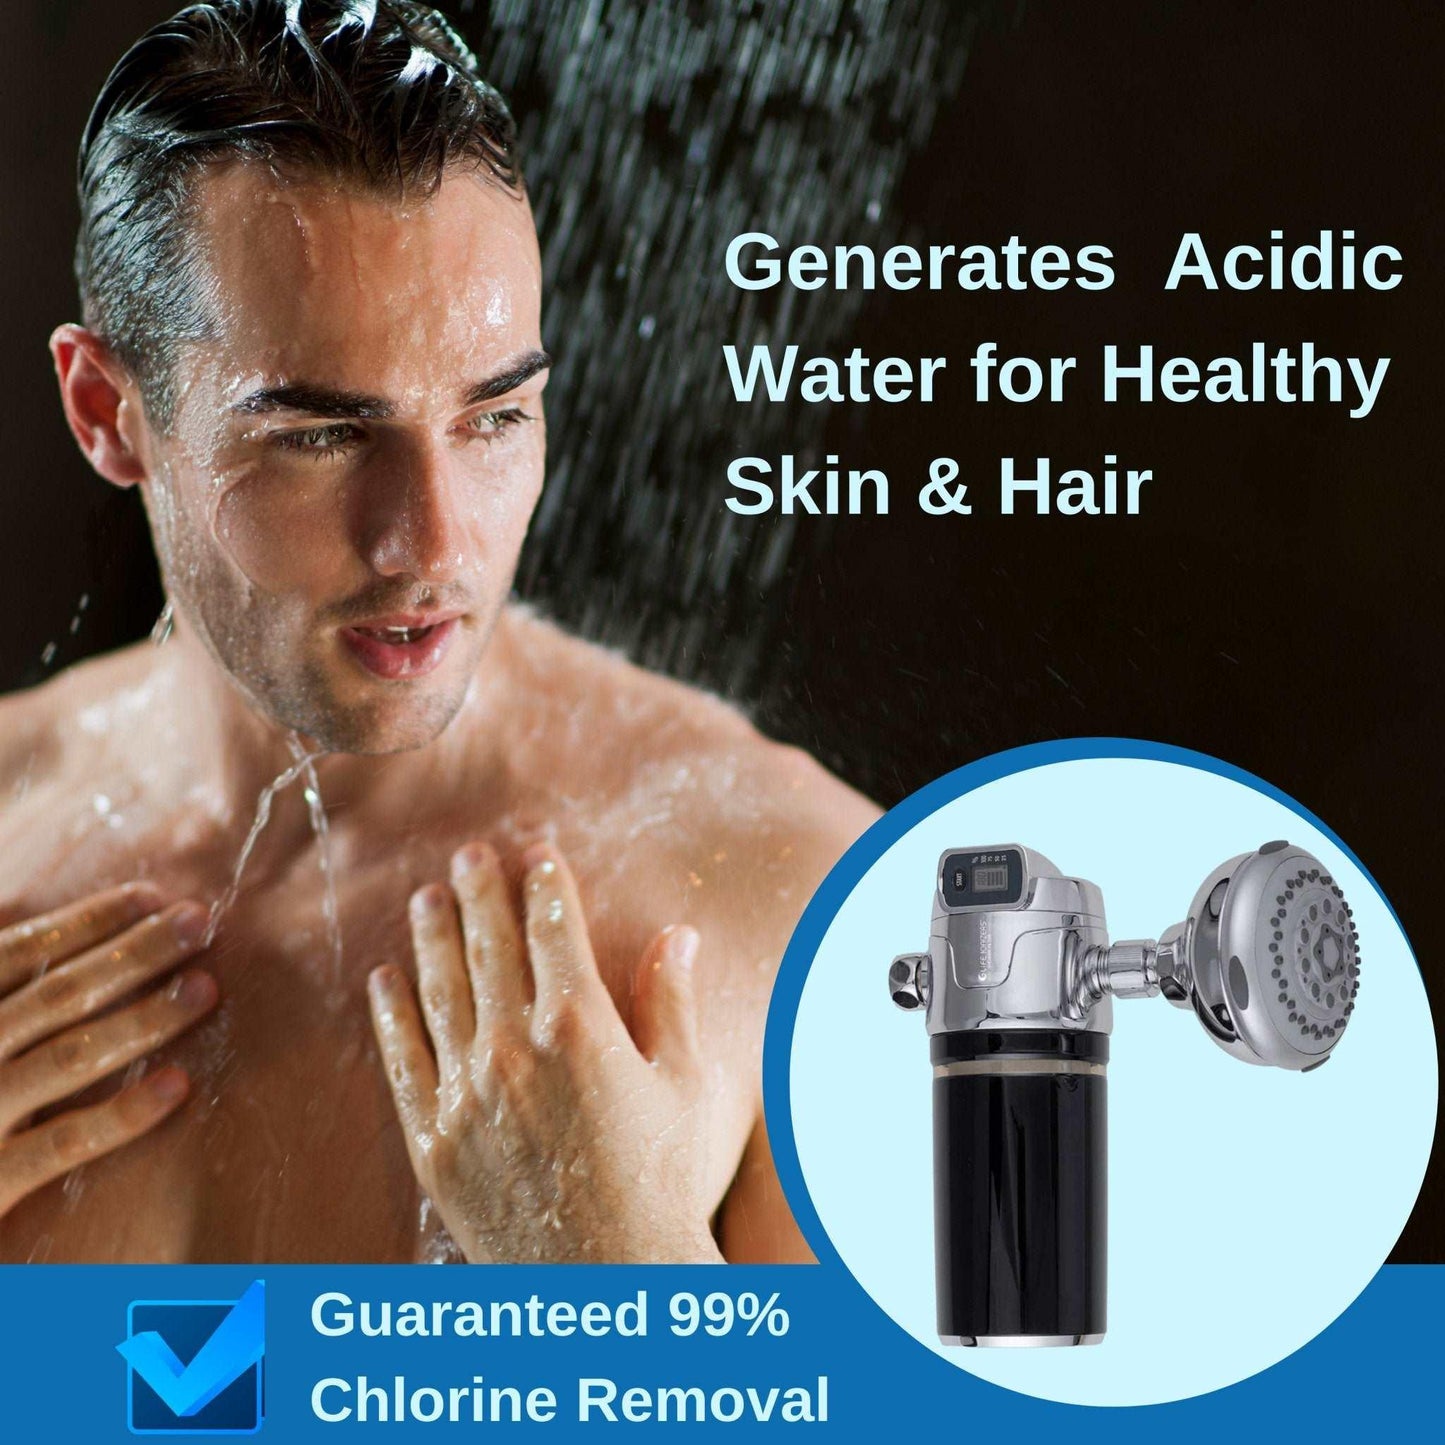 Life Shower Double Filtration Filter with Shower Head